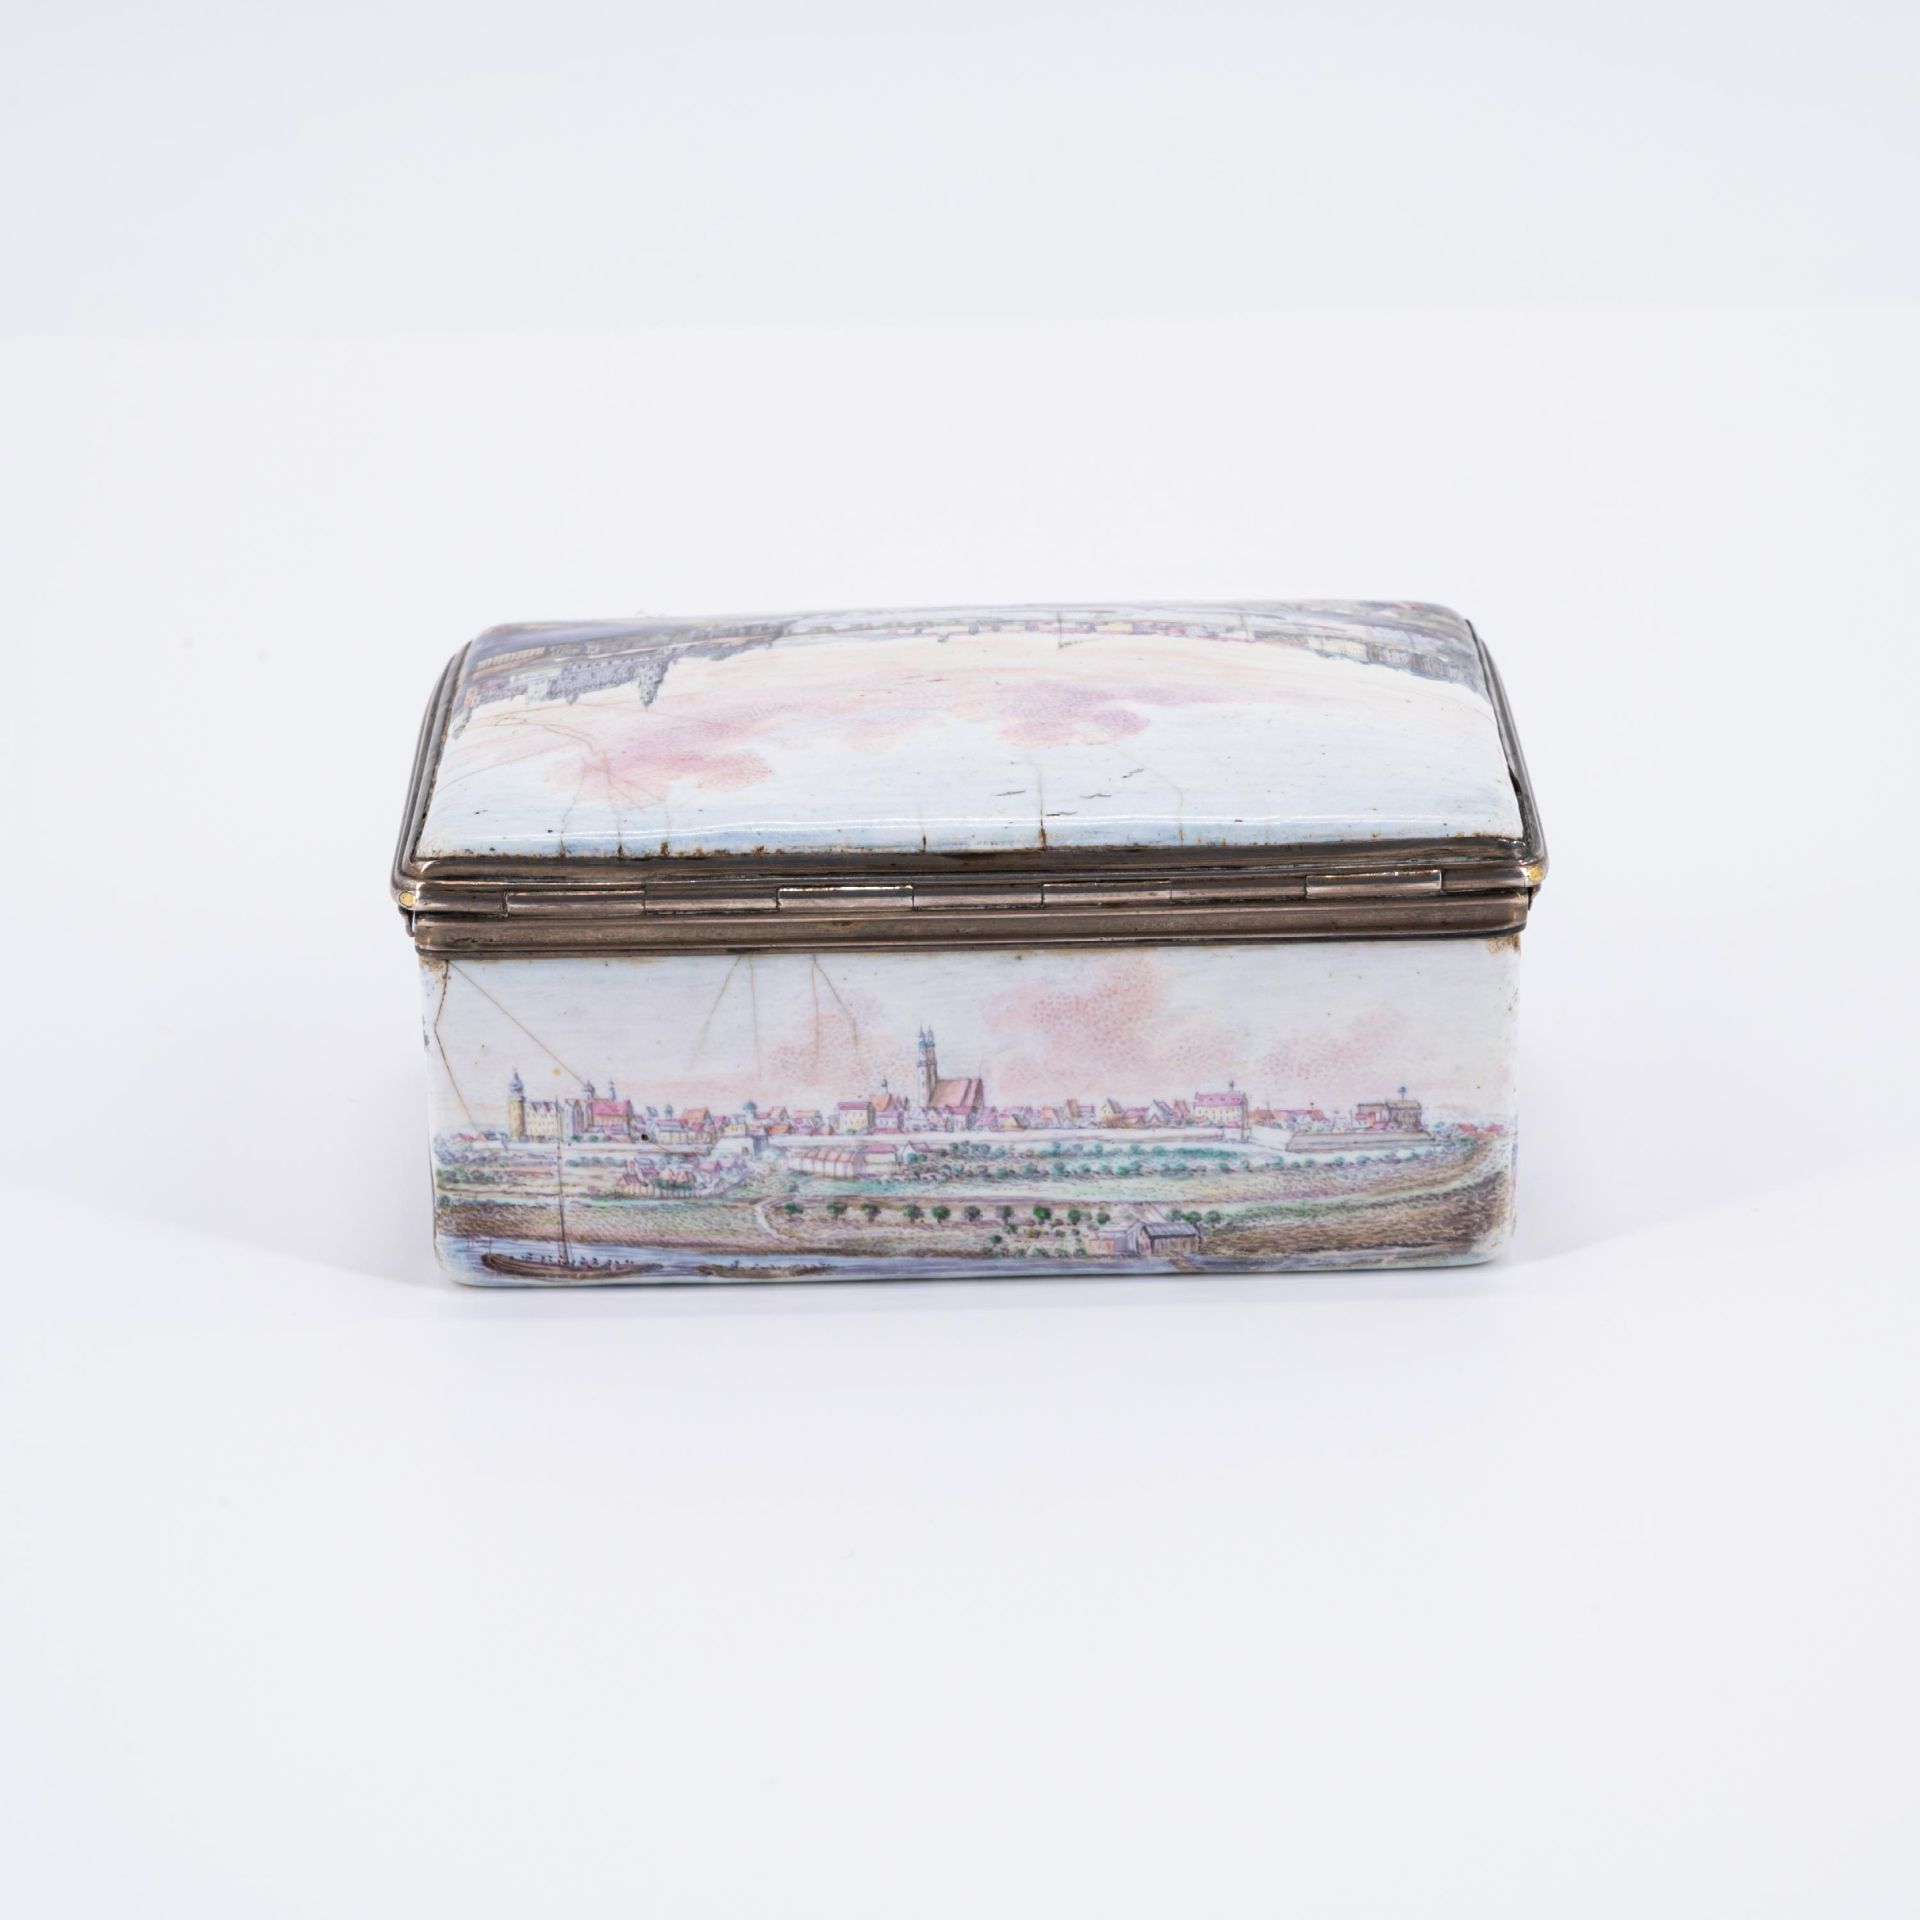 Snuff box with landscape views of Albertine Saxony - Image 3 of 7